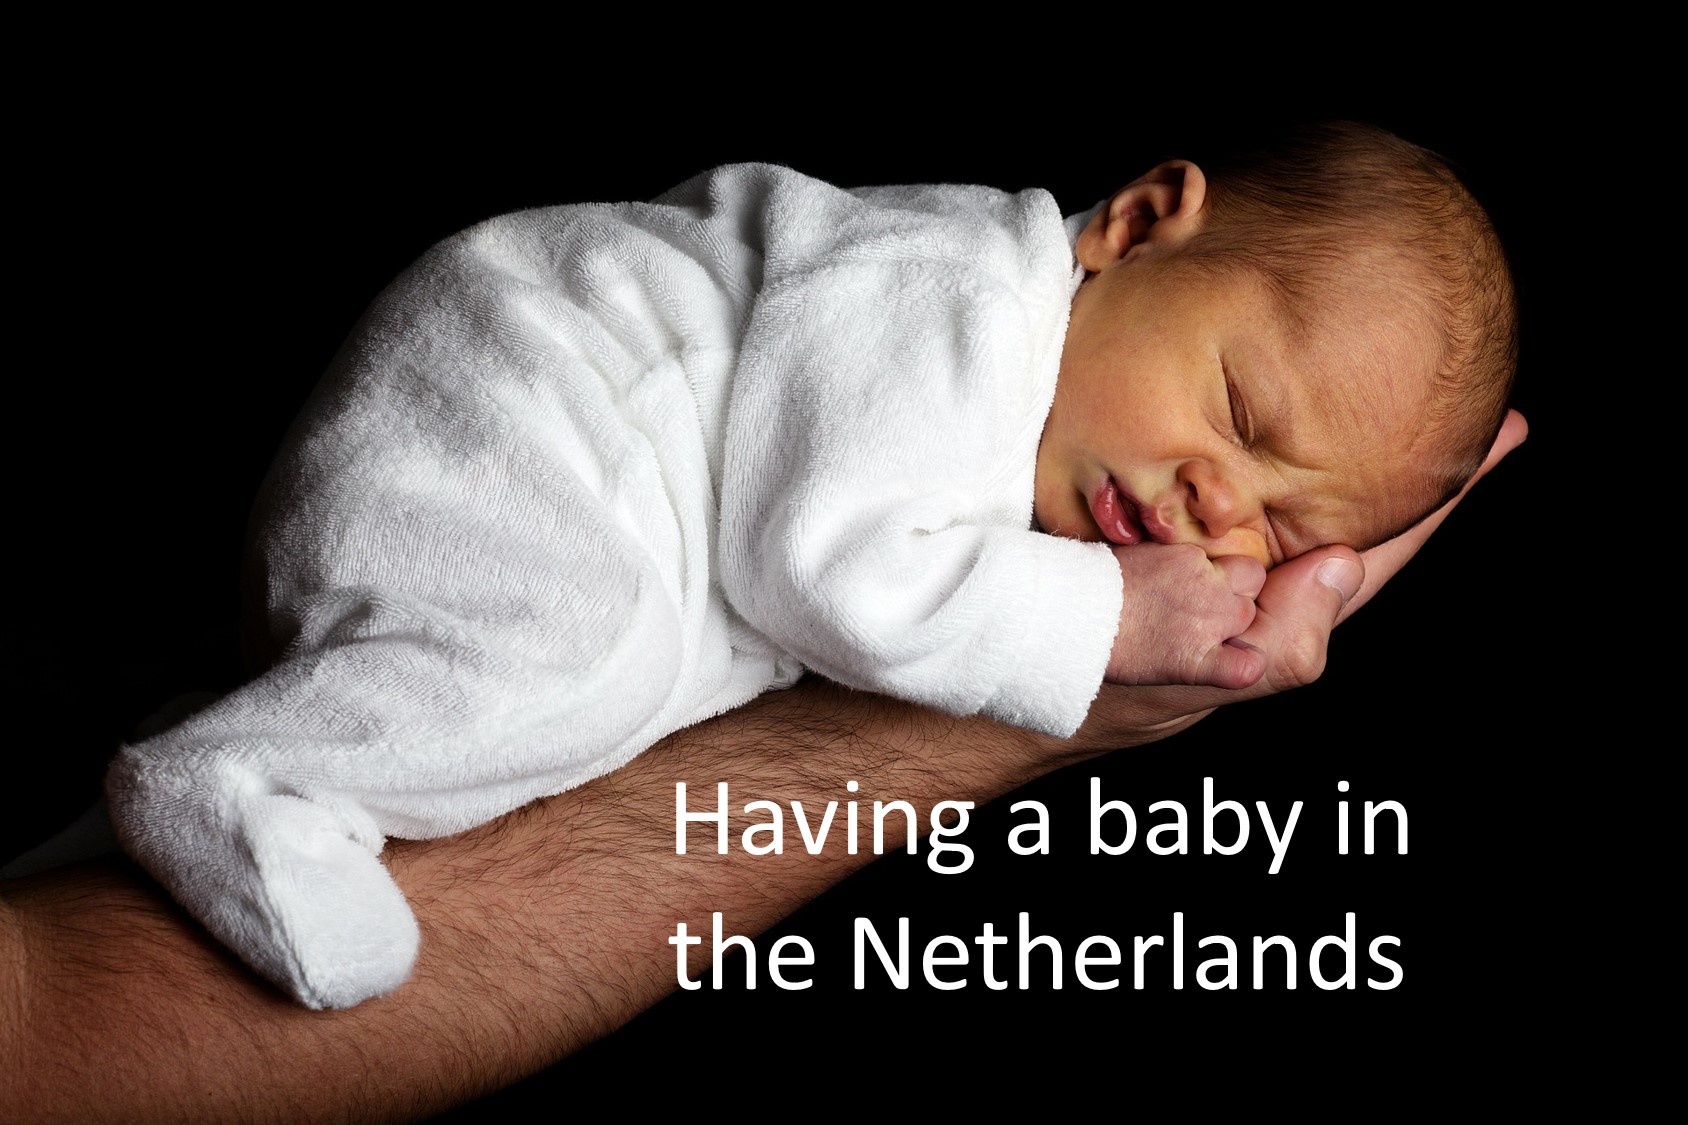 Survey: Giving birth in the Netherlands